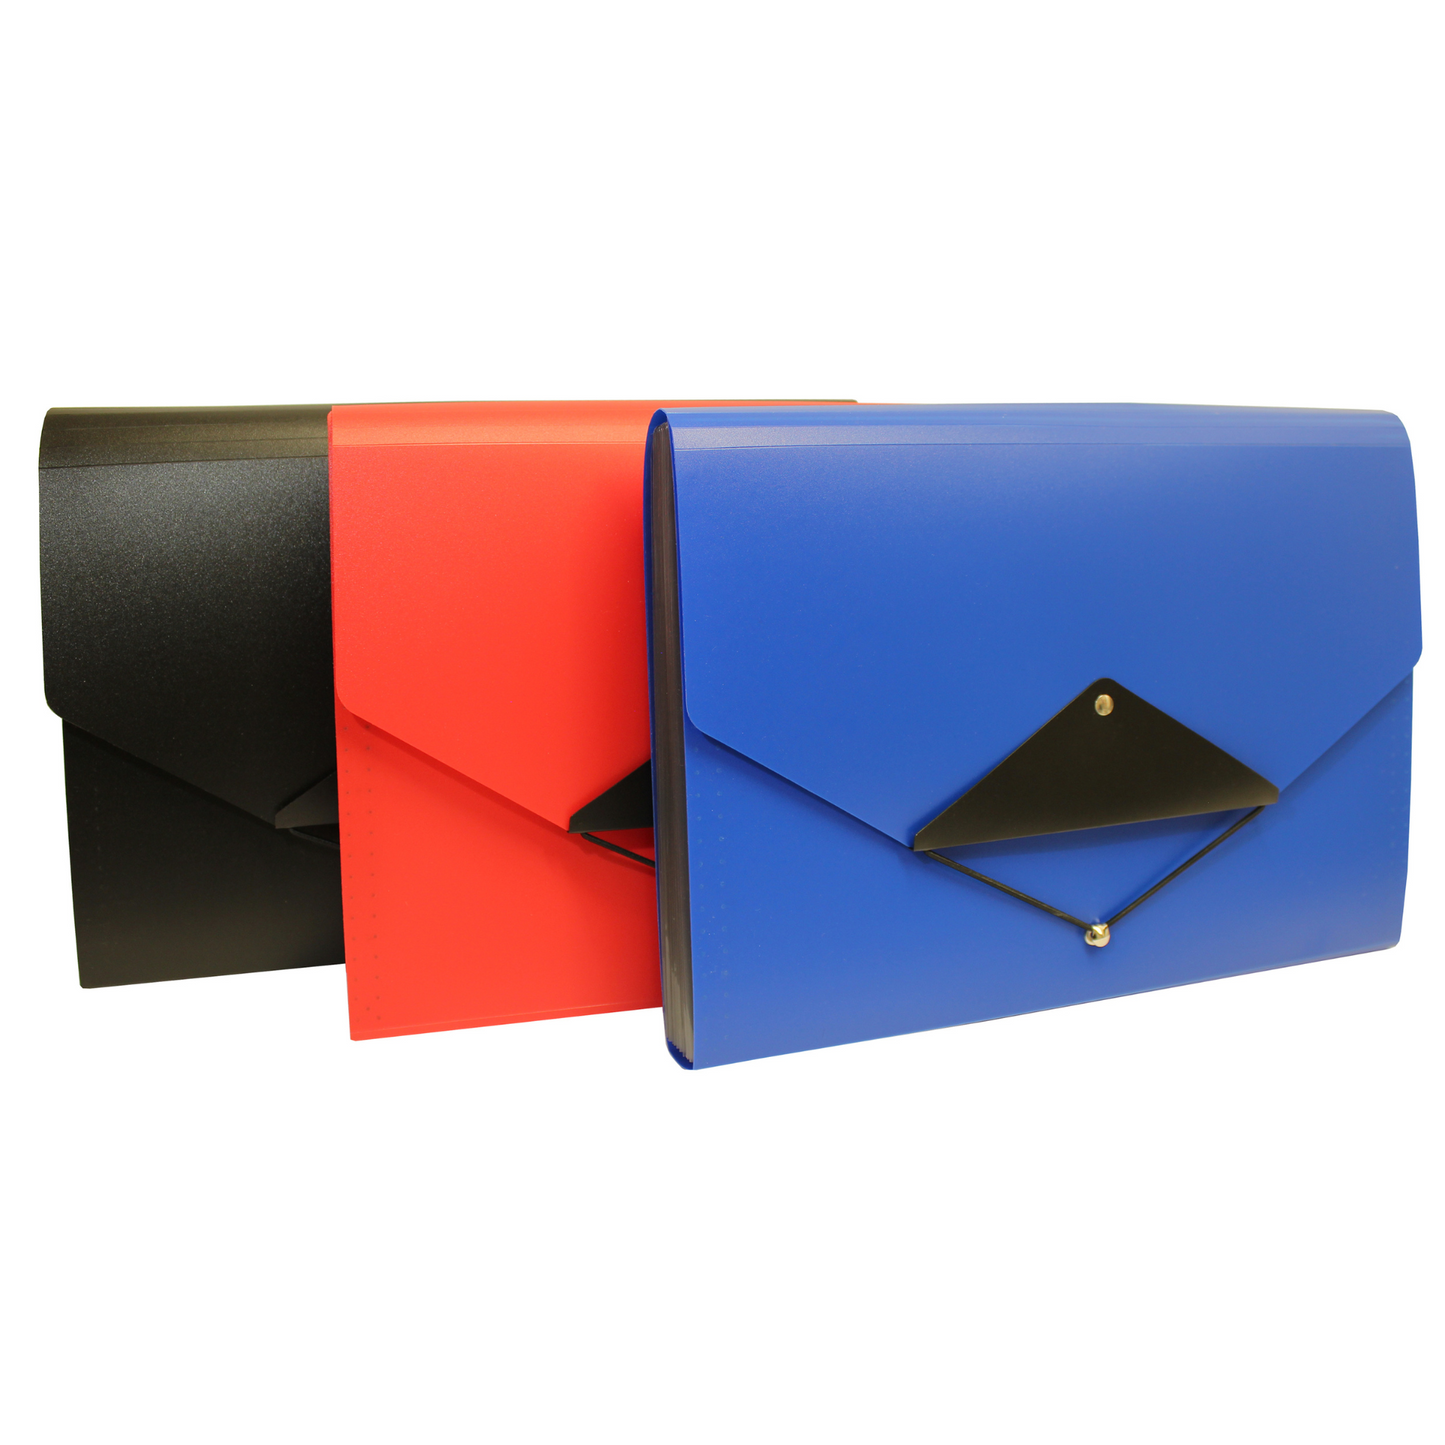 Three brightly colored envelope-style folders displayed overlapping each other. The front folder is blue with a triangular flap and elastic closure, the middle one is red, and the one at the back is black. Their vibrant colors and design suggest a modern and stylish way to organize and carry documents.